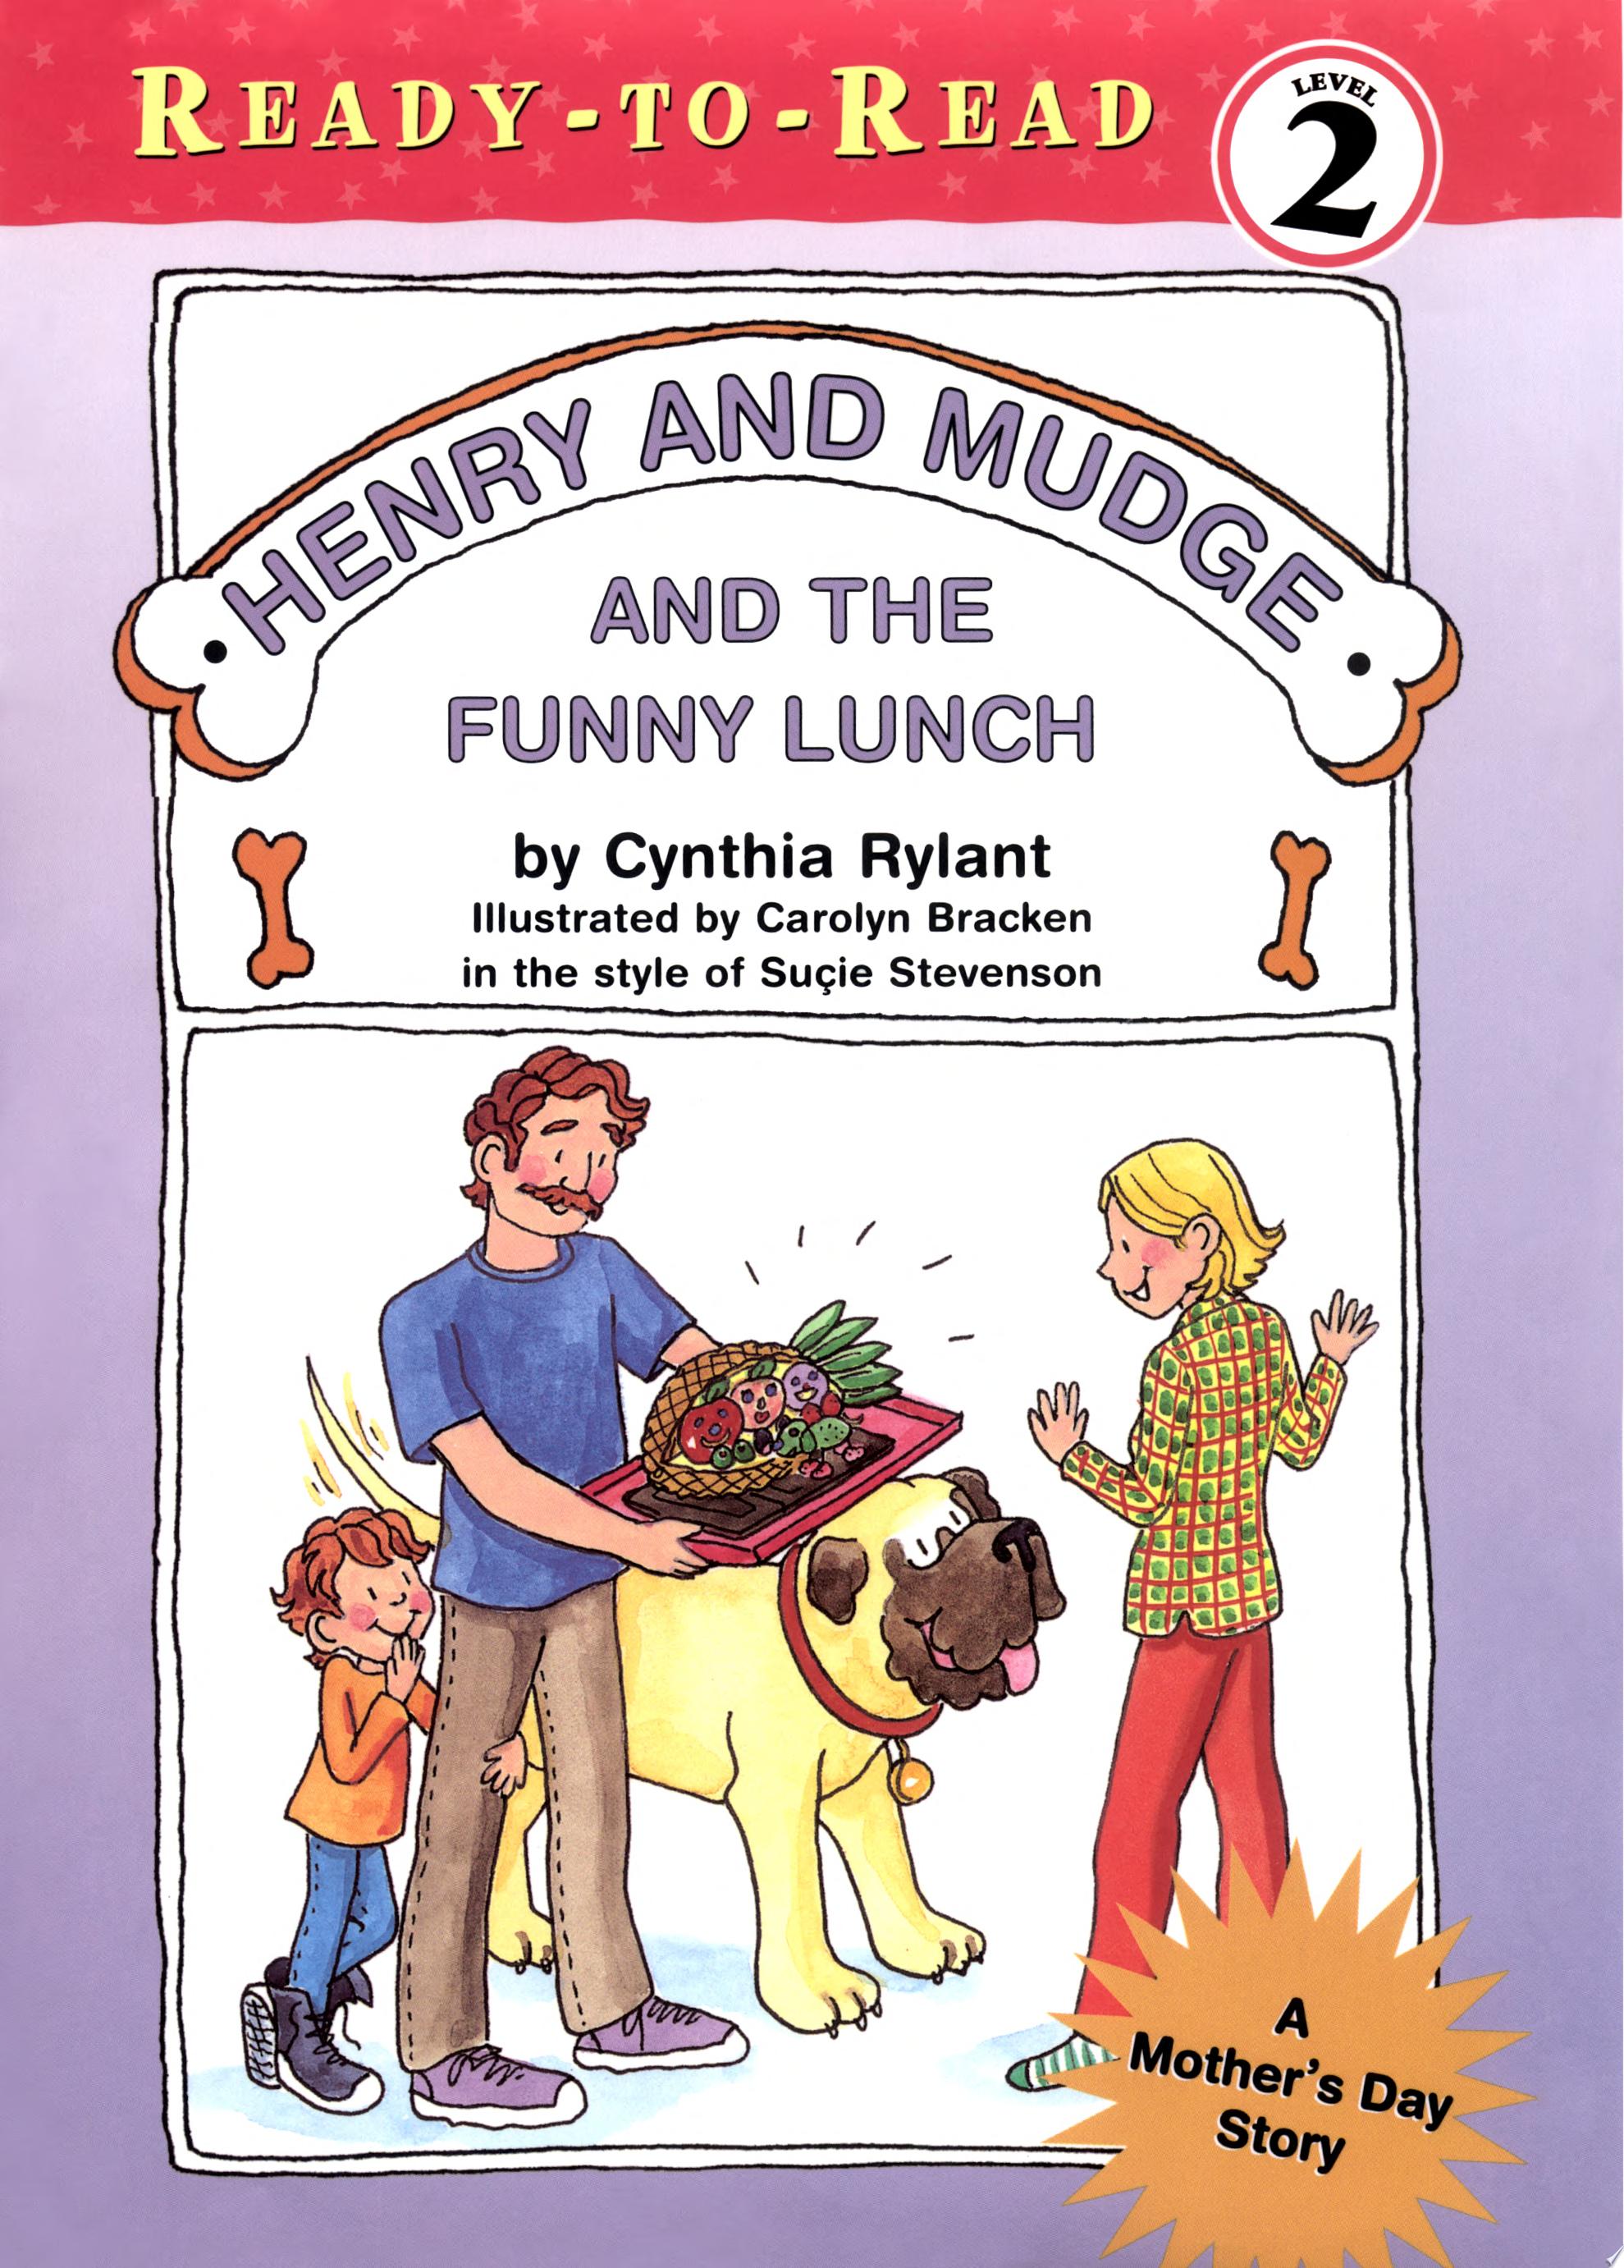 Image for "Henry and Mudge and the Funny Lunch"